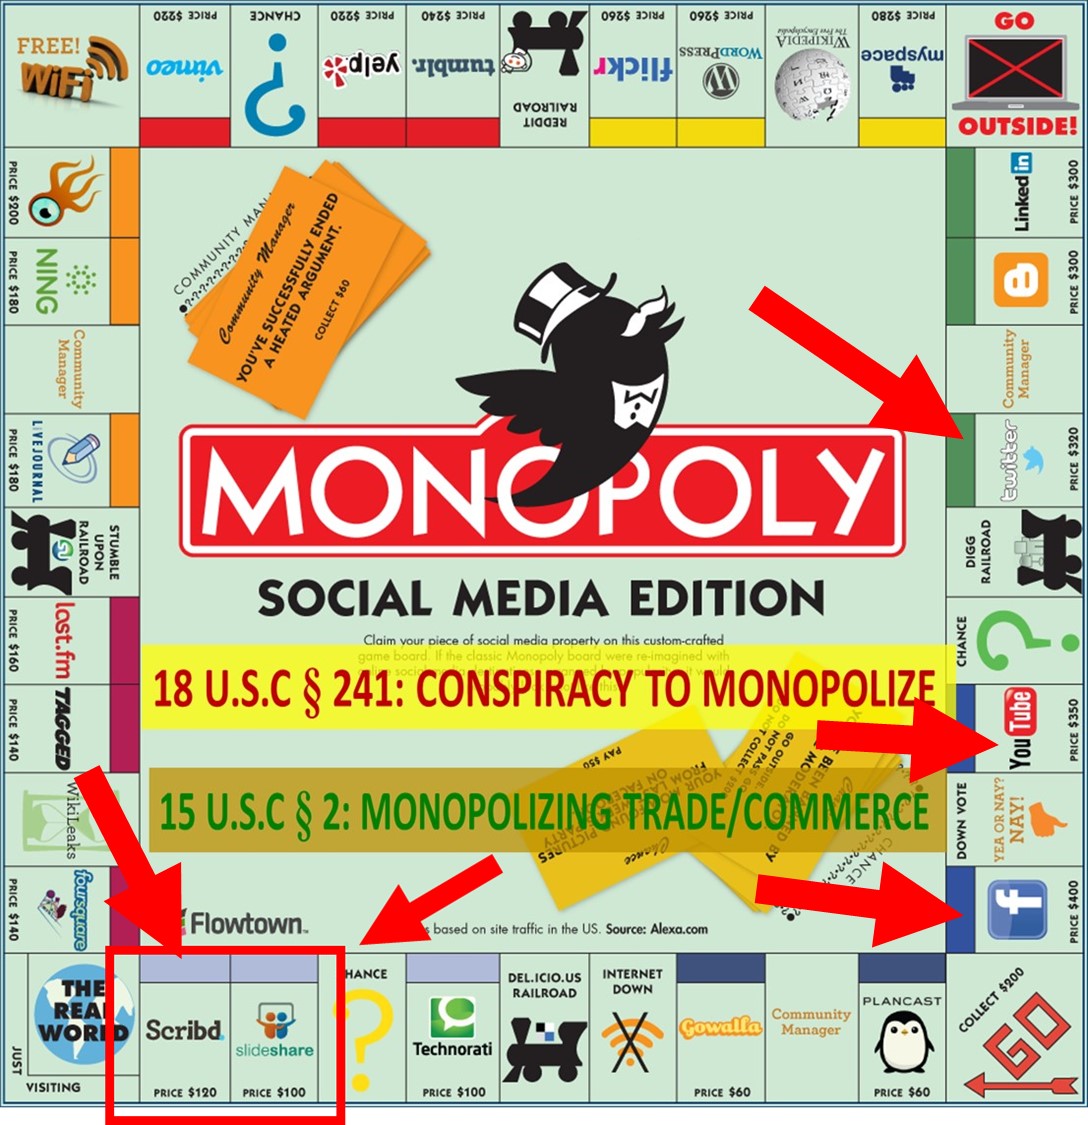 Zionist OWNED MONOPOLIES Social MEDIA